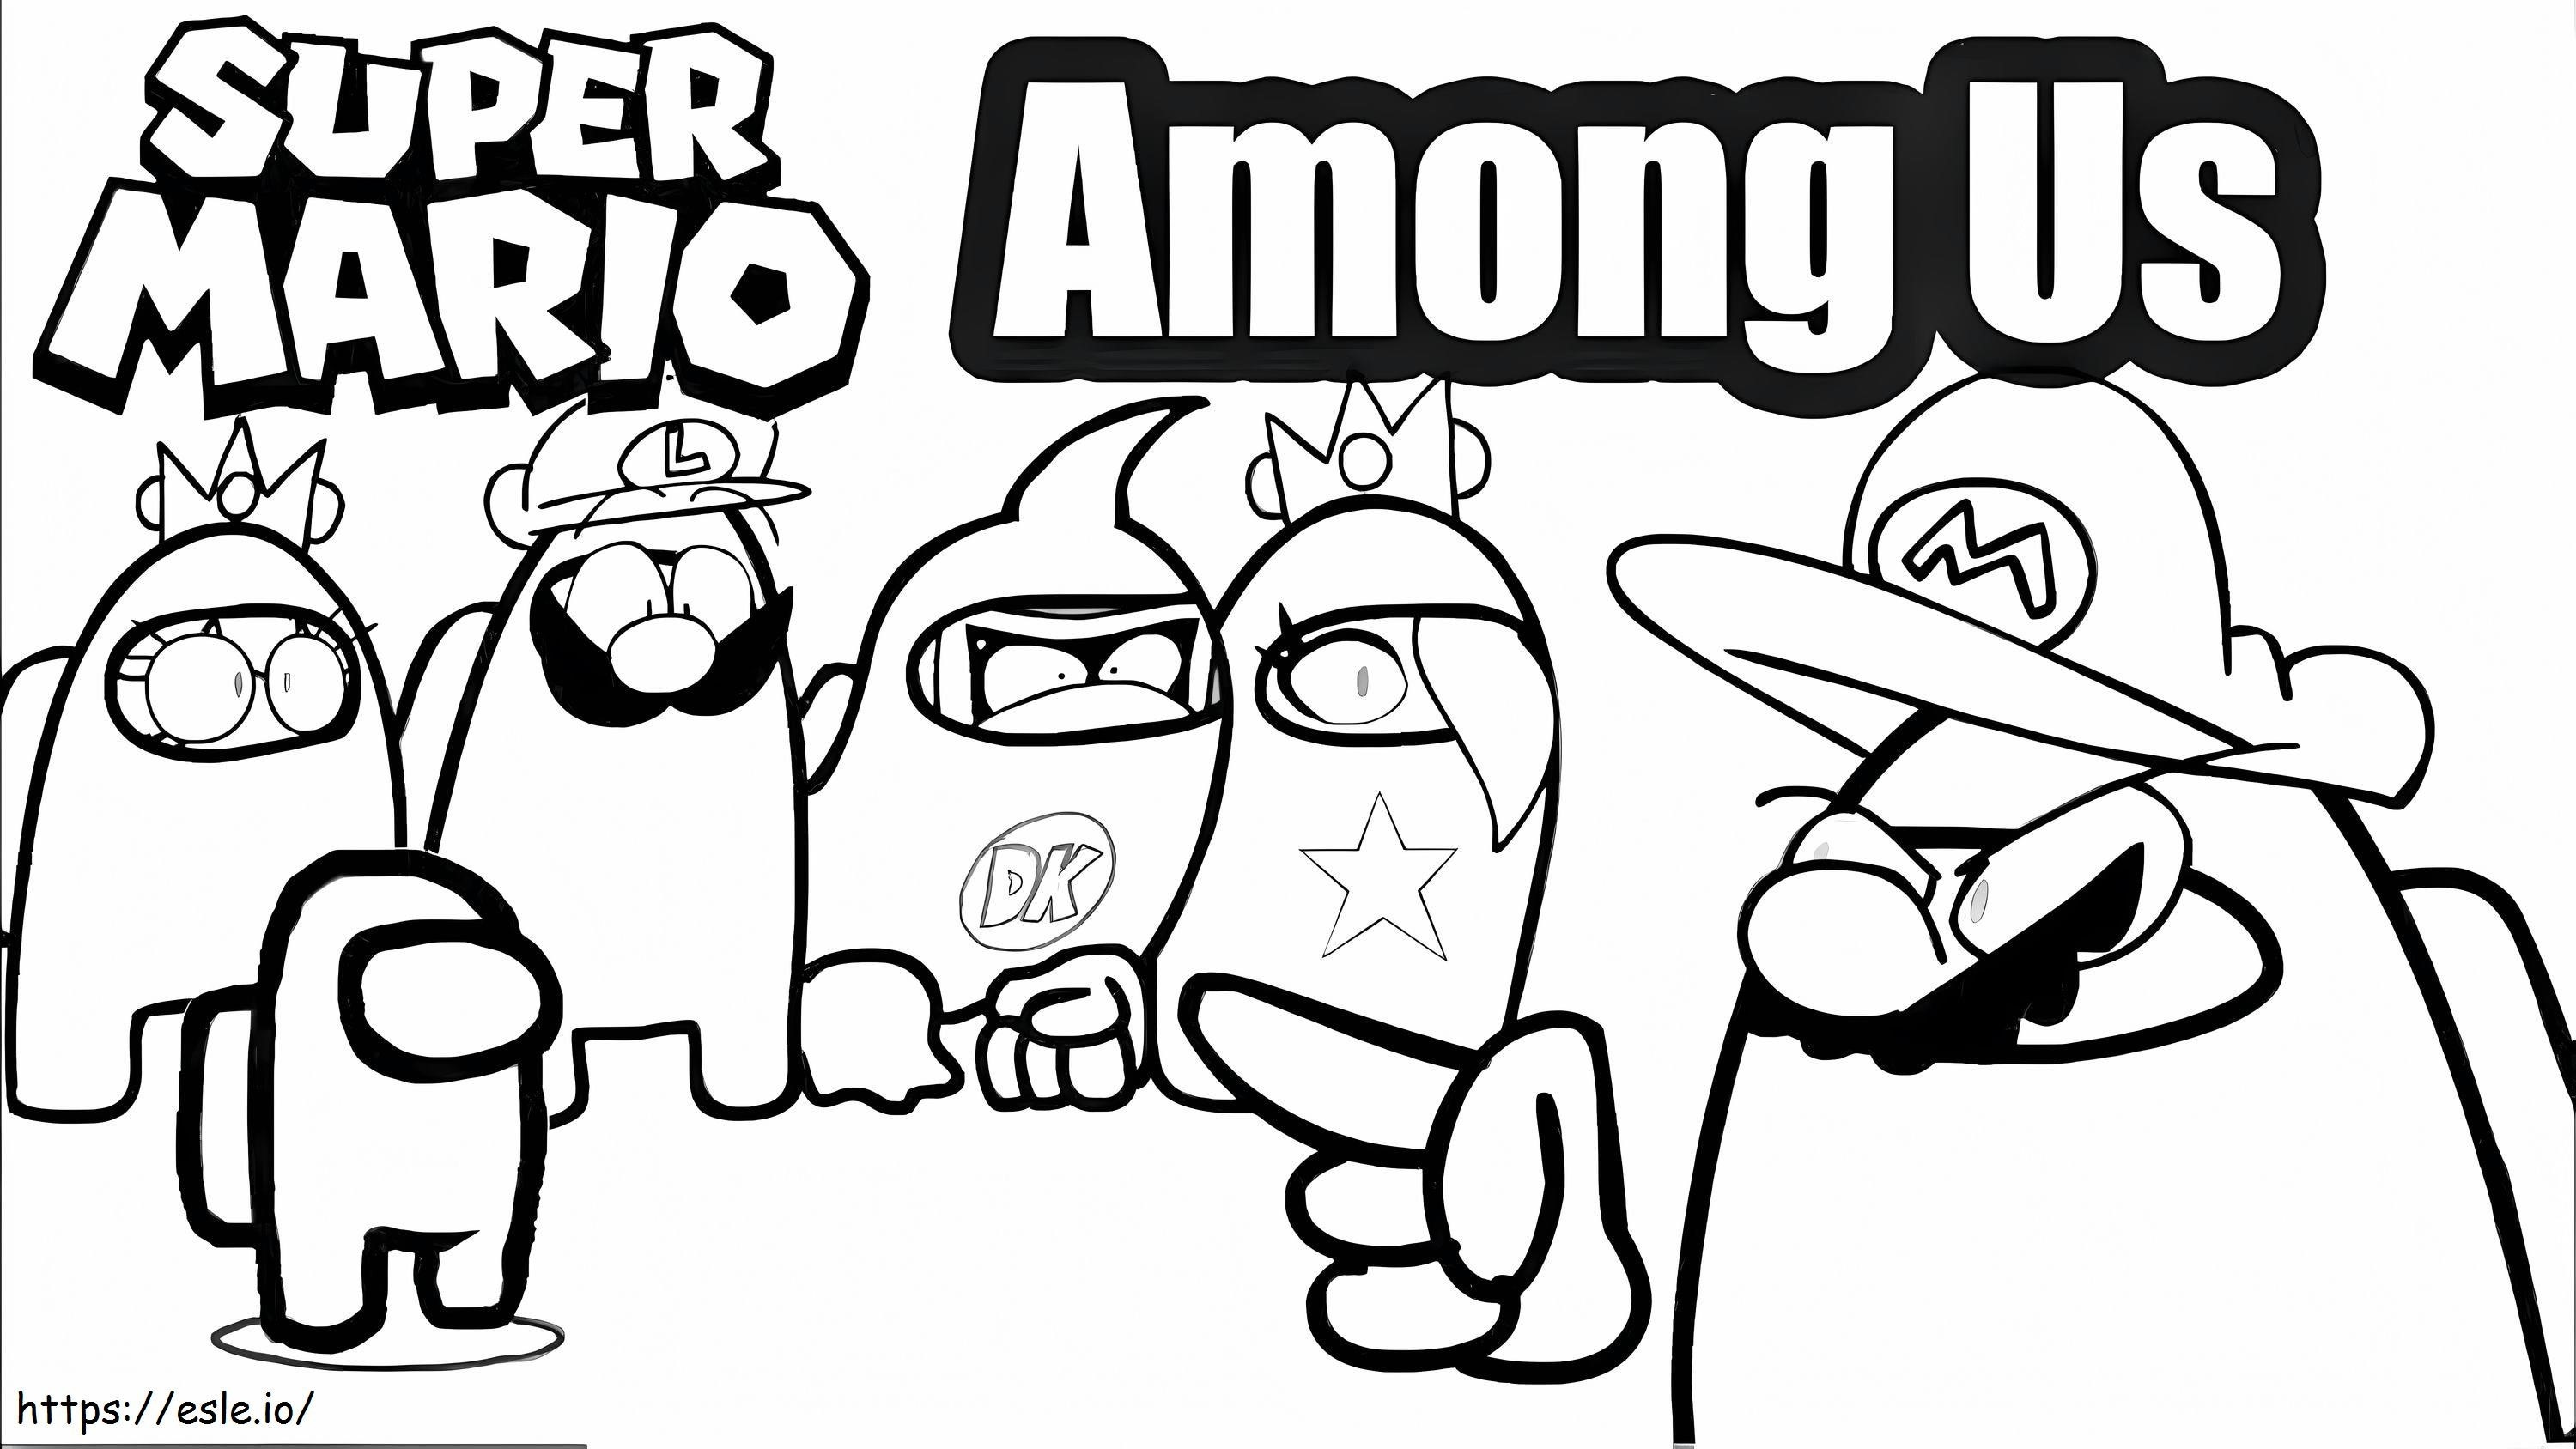 Super Mario Among Us coloring page